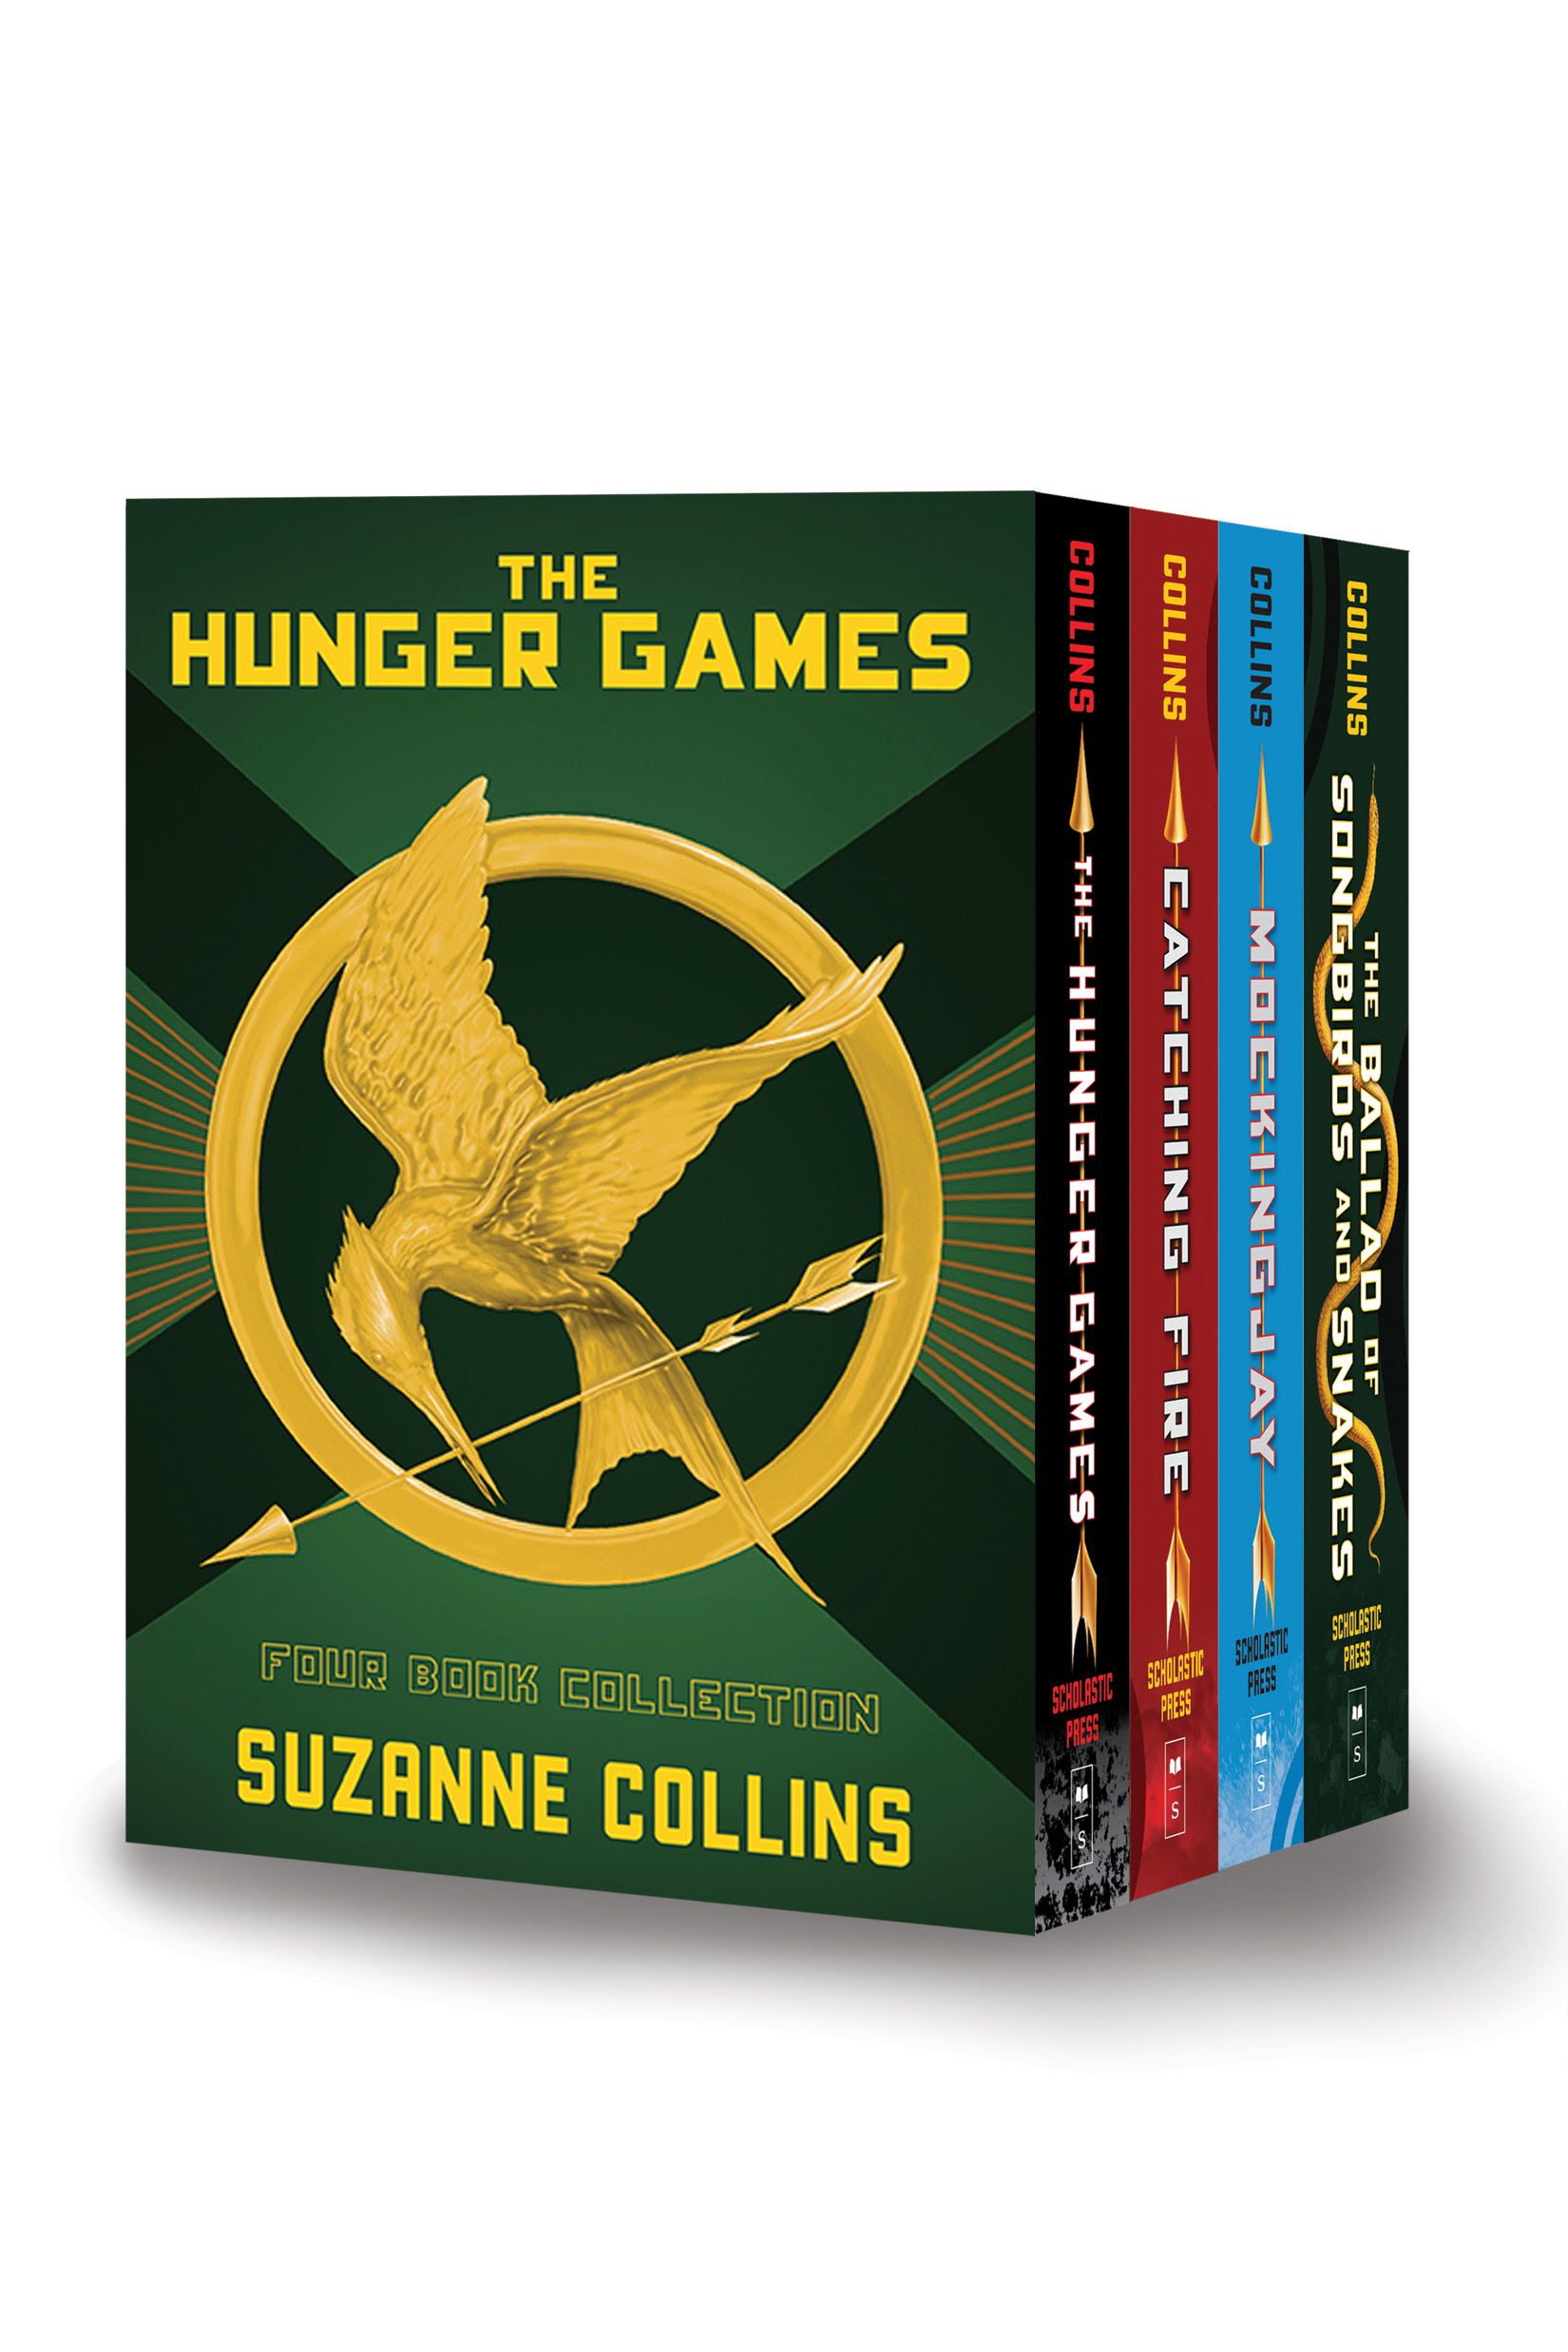 pdf download The Hunger Games: Four Book Collection (The Hunger Games, Catching Fire, Mockingjay, The Ballad of Songbirds and Snakes)